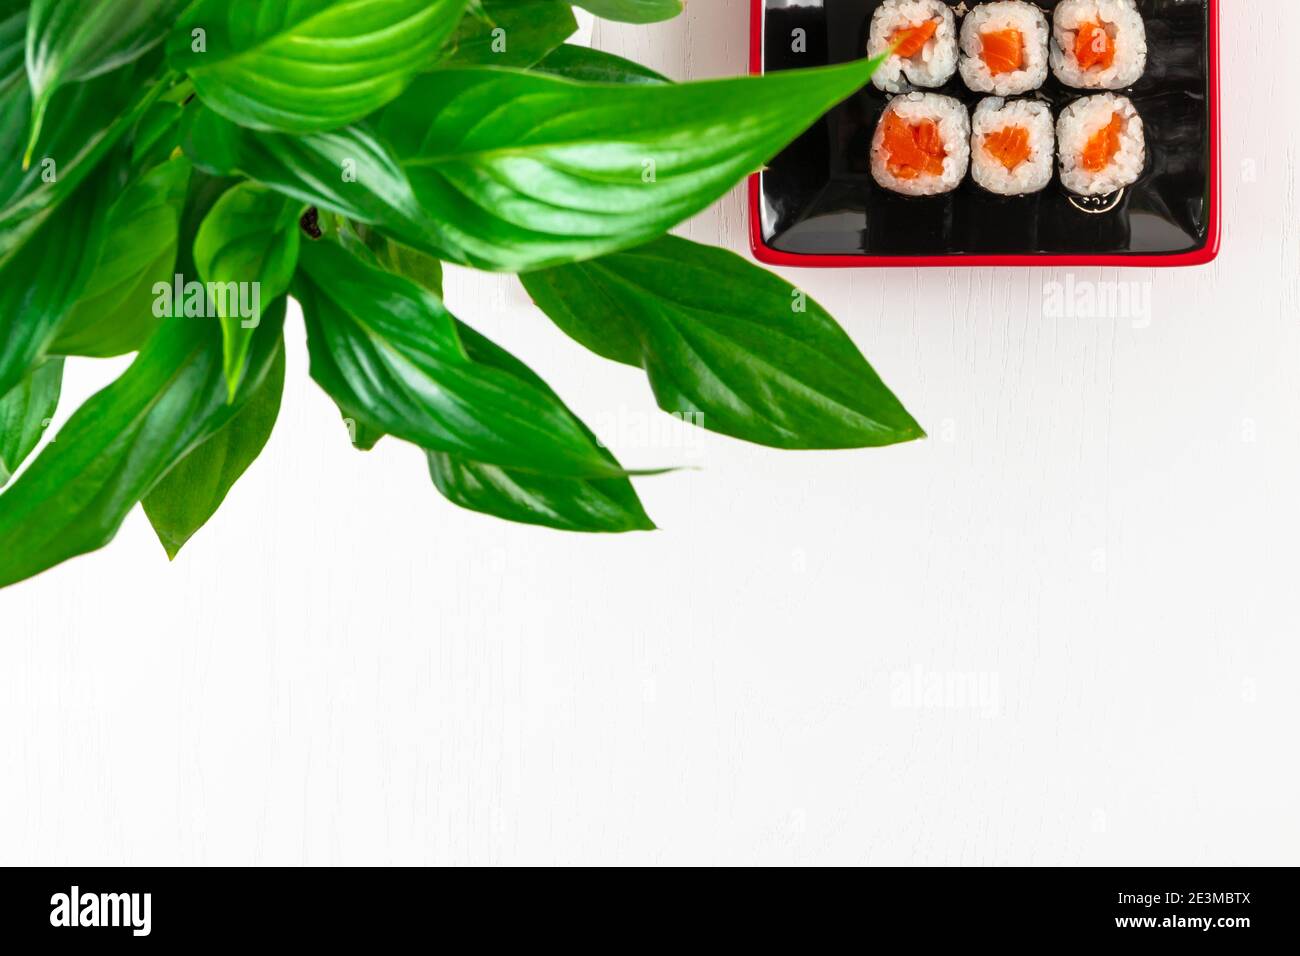 fresh appetizing rolls with salmon in nori seaweed in black-red plates on a white plate. near young green leaves of a plant Stock Photo